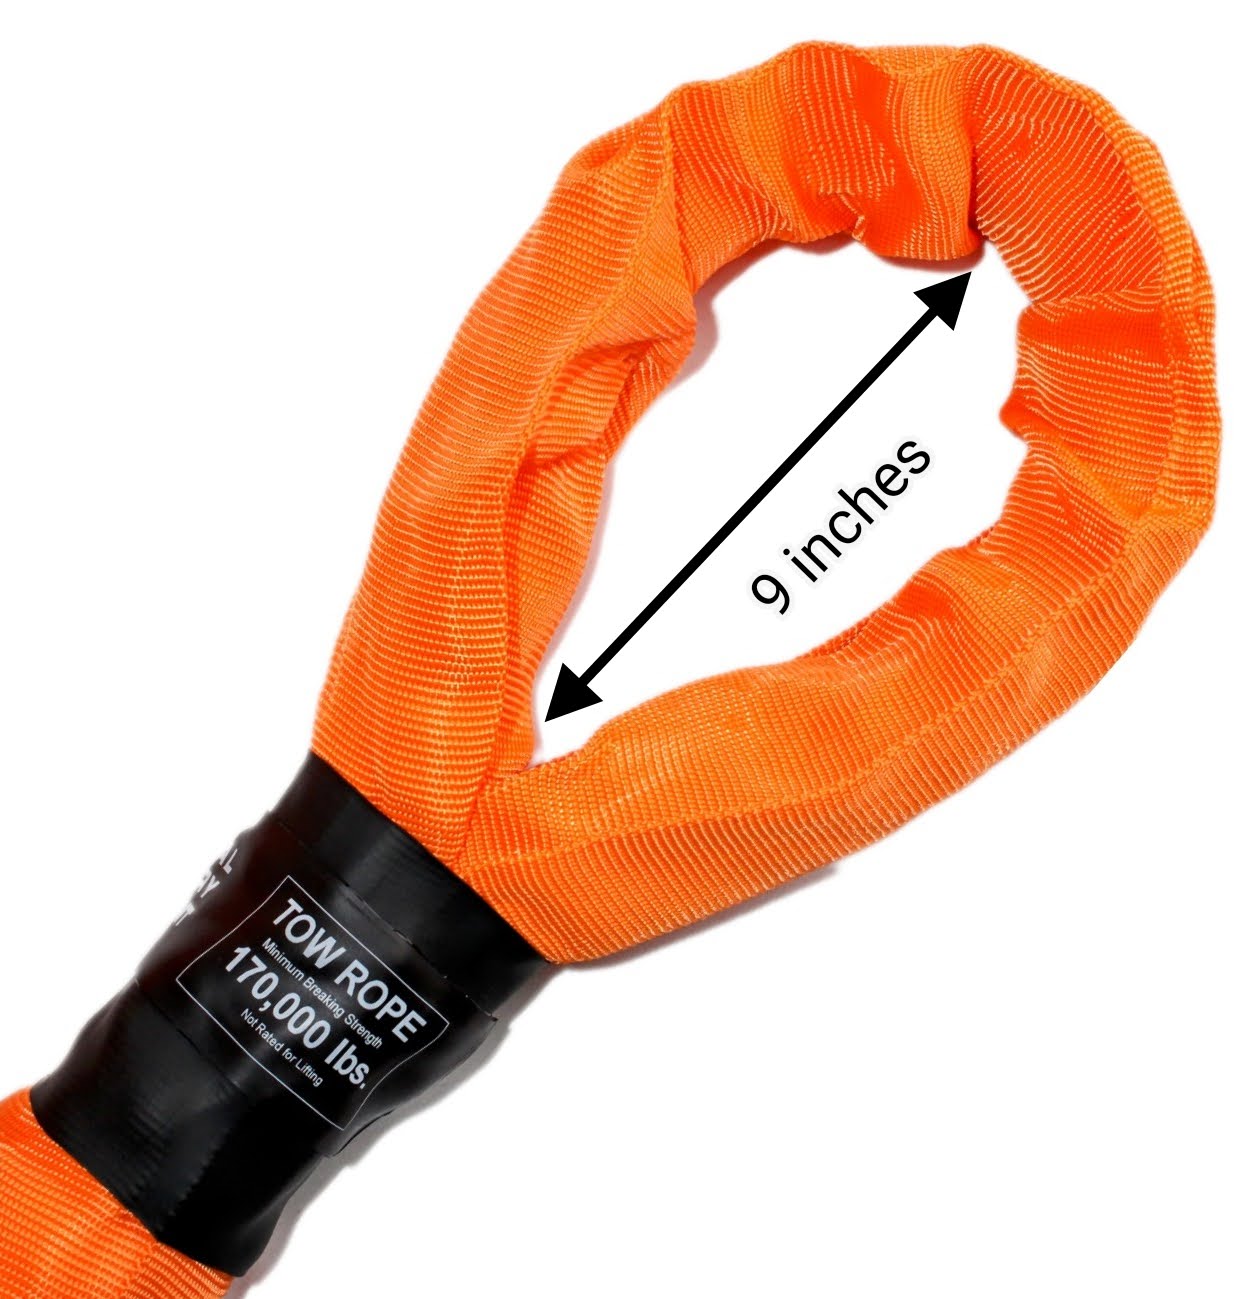  Heavy Duty Tow Strap- 6614 LB Break Strength,Recovery Tow Strap  Use for Emergency Road Towing Rope : Automotive